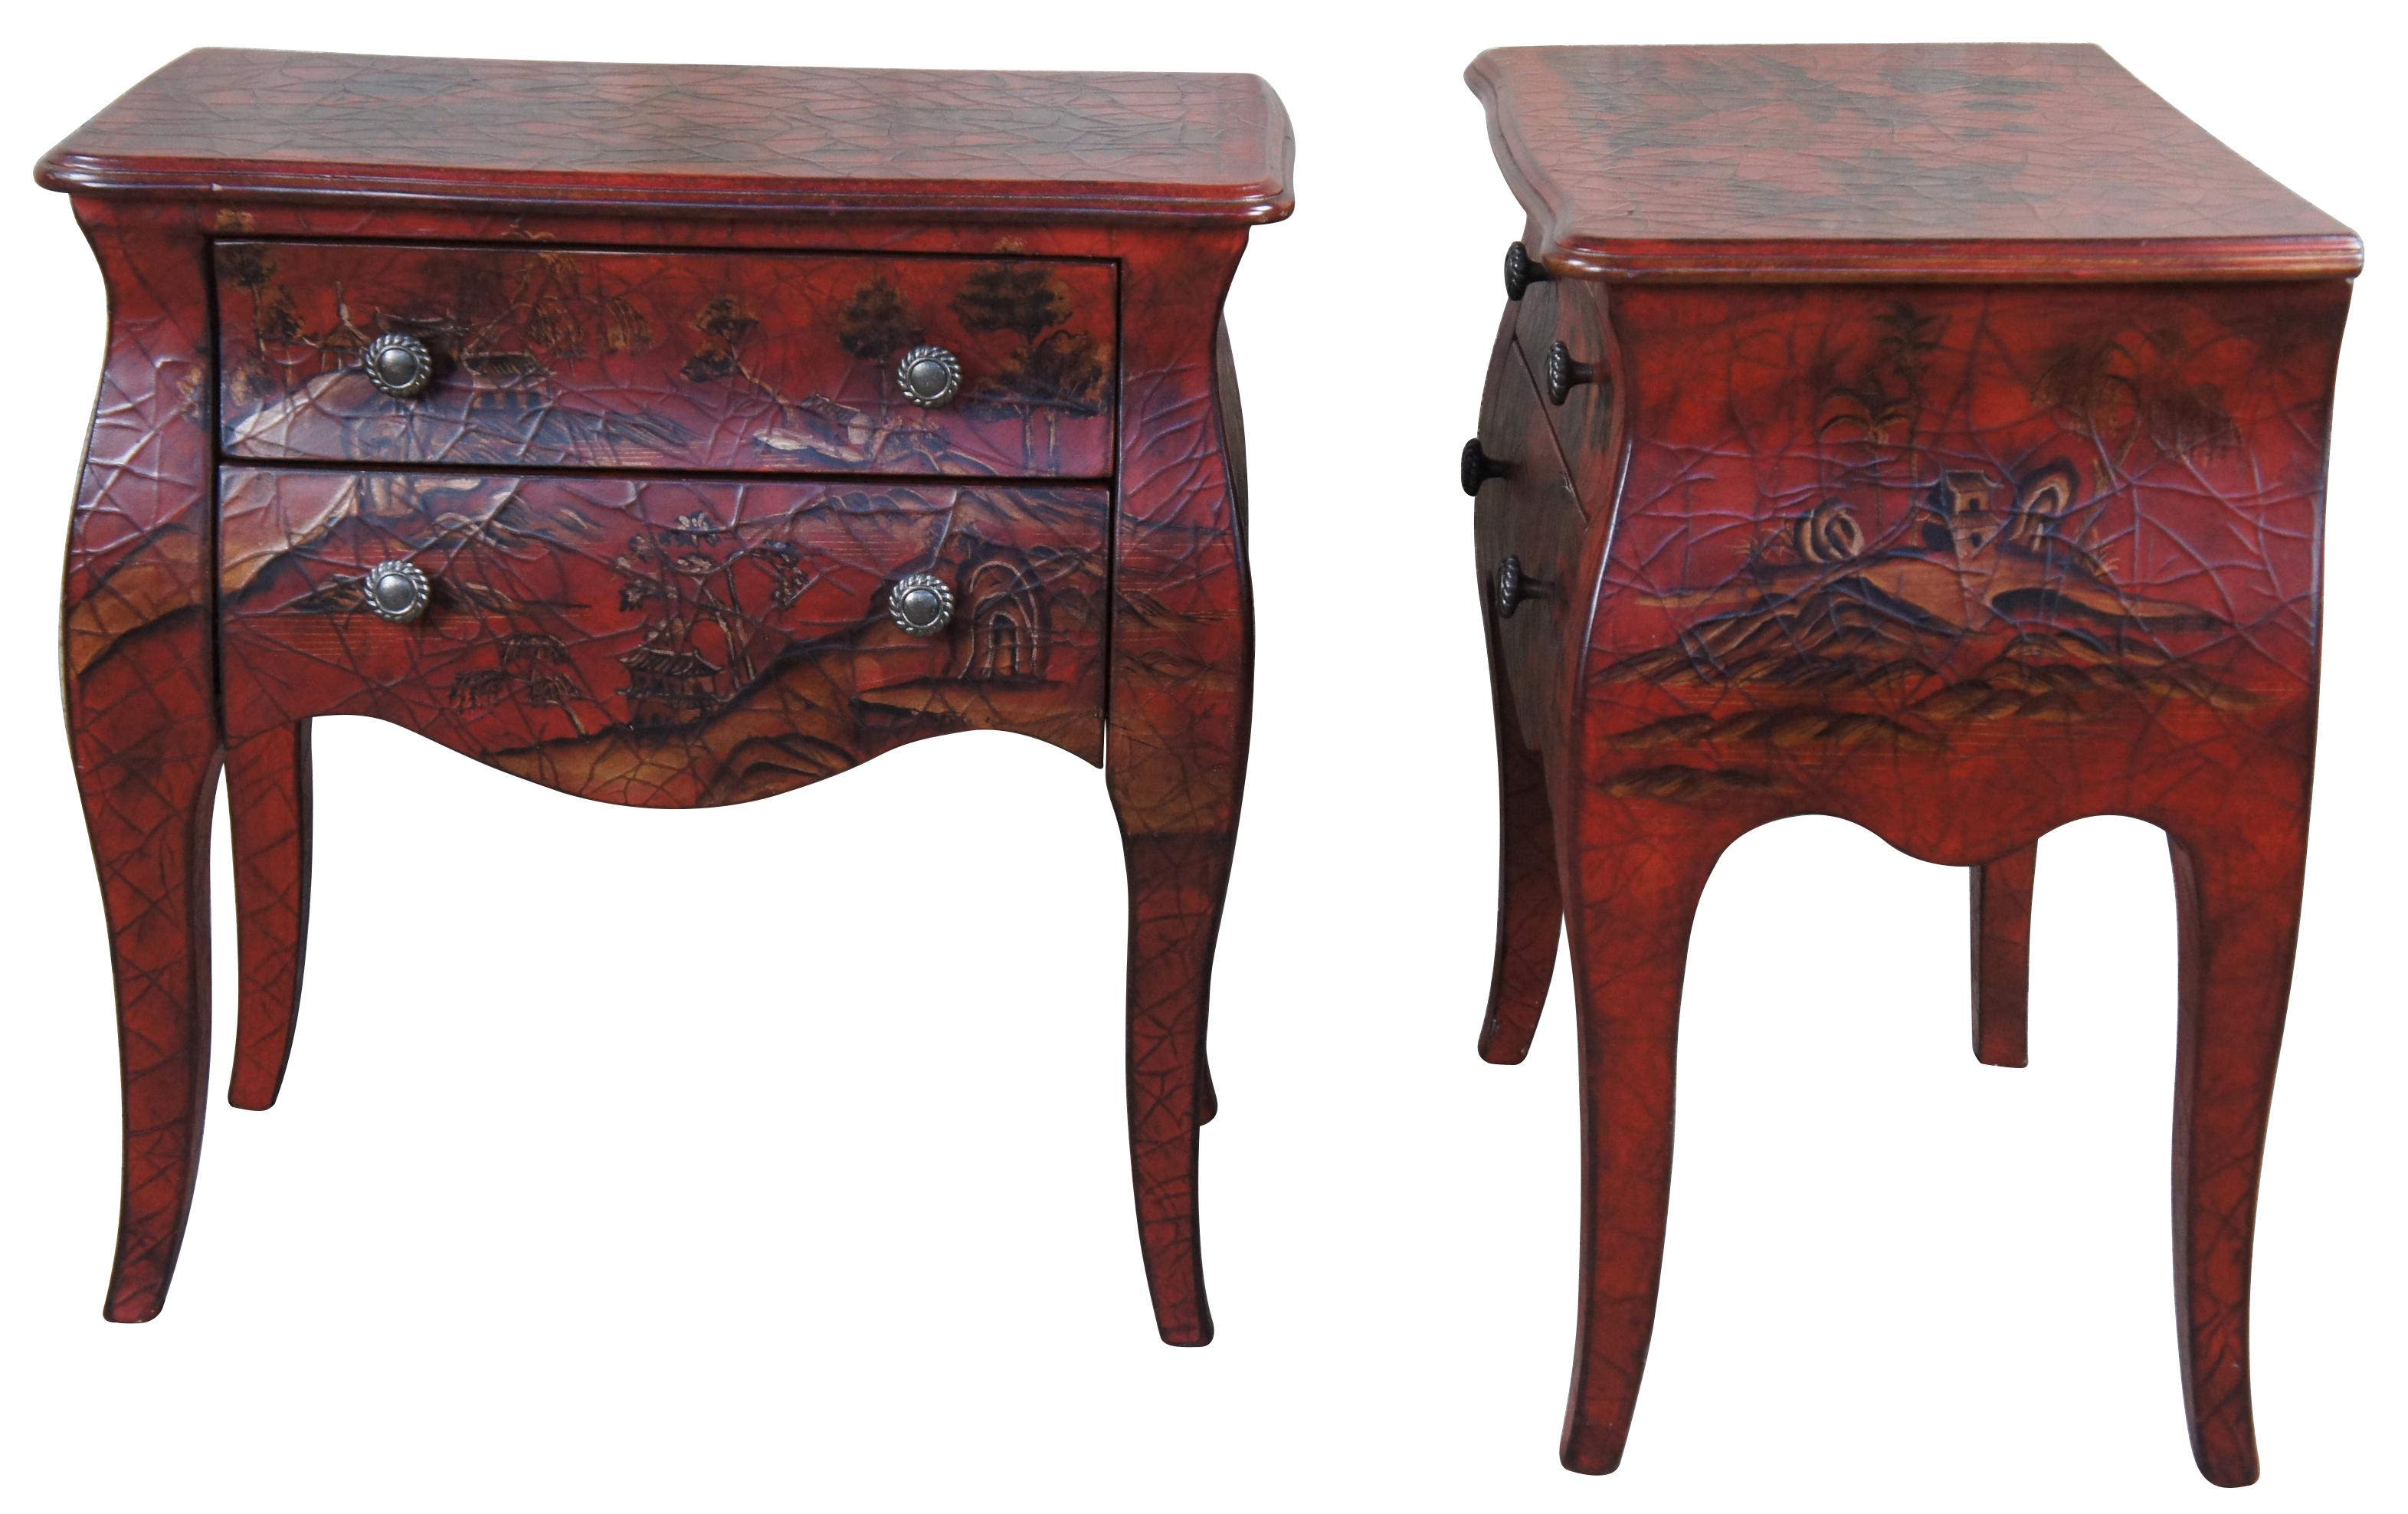 2 Chinese nightstands or side tables, circa 1990s. A french inspired bombe form finished in red with a crackle finish and painted chinoiserie motif. Features two drawers and silver gadrooning drawer pulls.